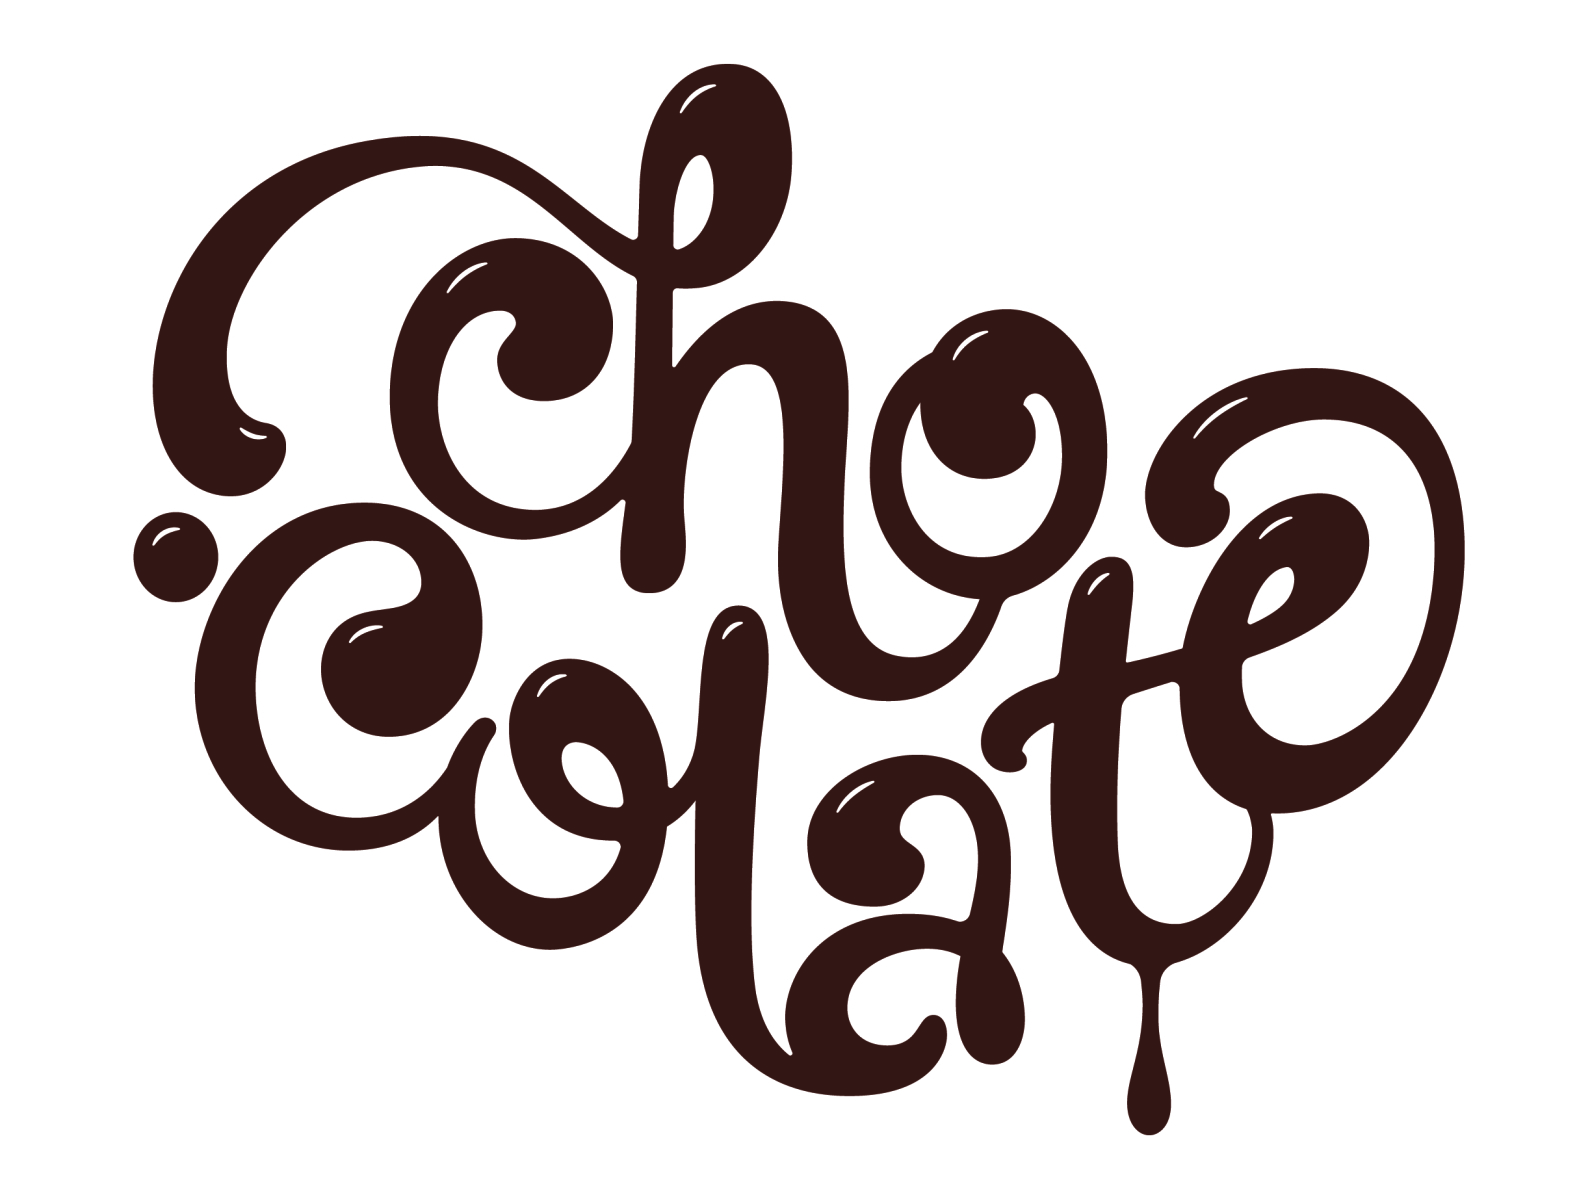 Chocolate (Lettering) .